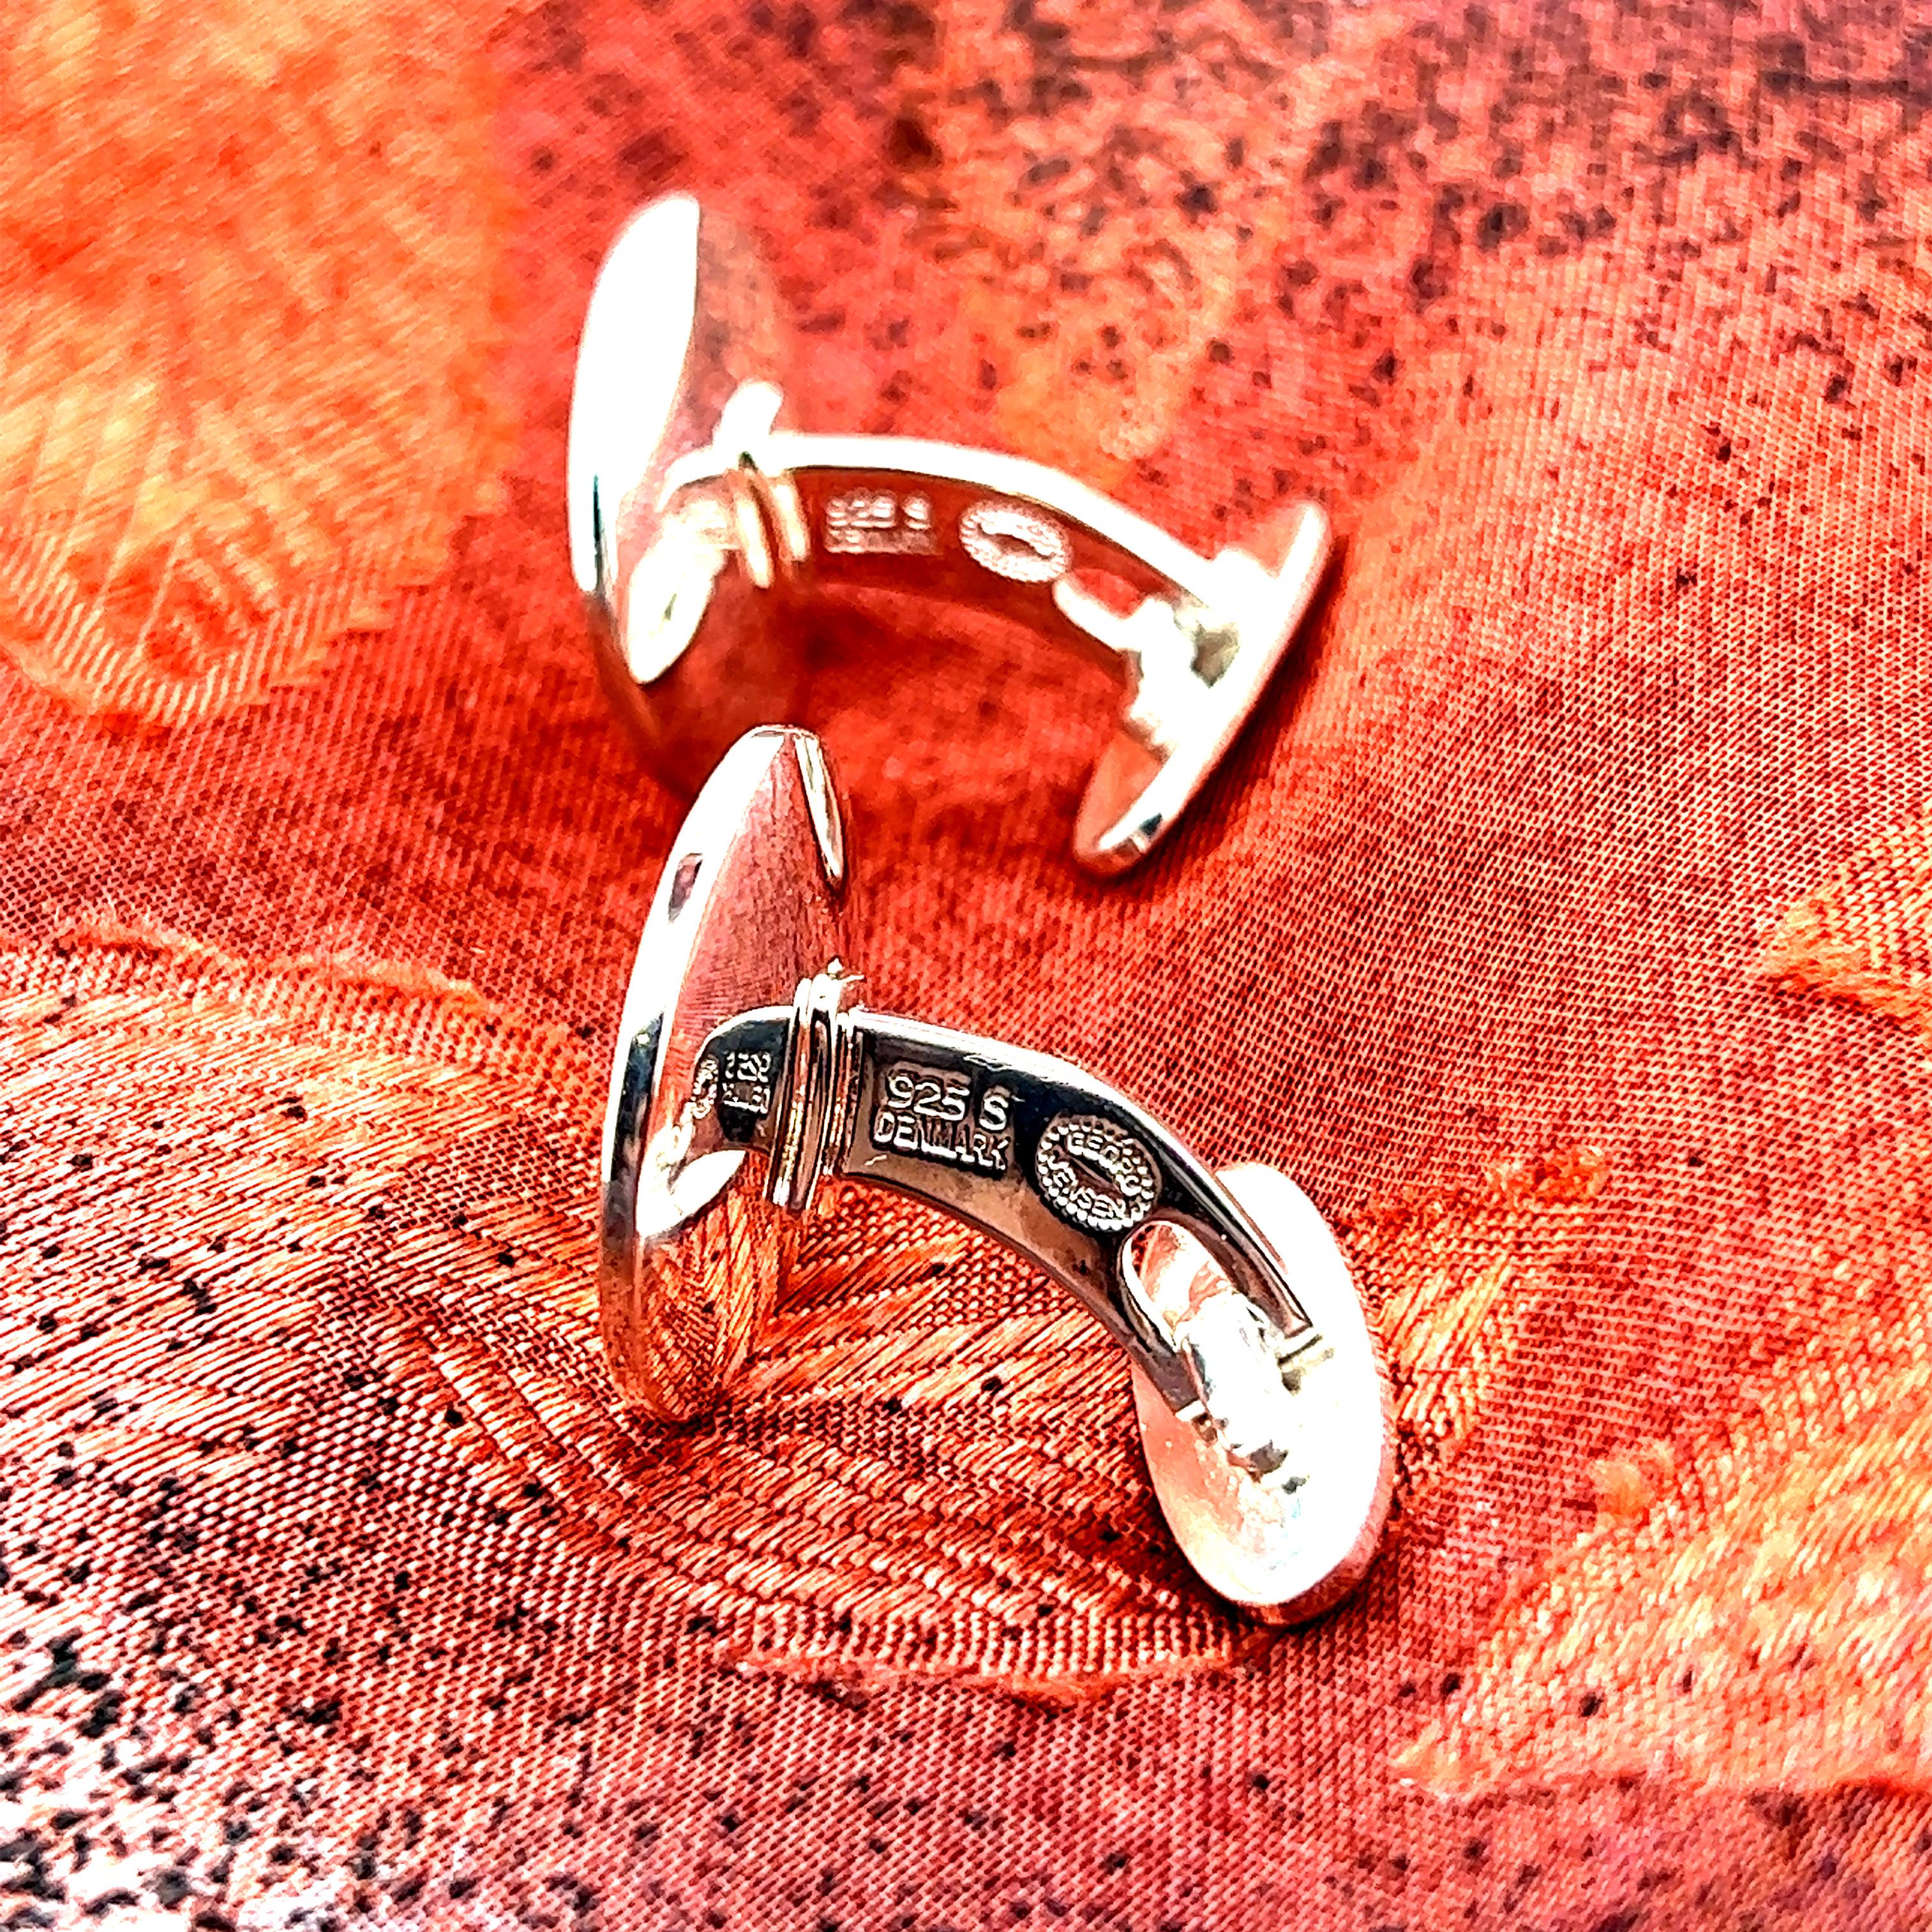 Georg Jensen Estate Sterling Silver Cufflinks 15.1 Grams GJ8

These elegant Authentic Georg Jensen Men's Cufflinks are made of sterling silver and have a weight of 15.1 grams.

TRUSTED SELLER SINCE 2002

PLEASE SEE OUR HUNDREDS OF POSITIVE FEEDBACKS